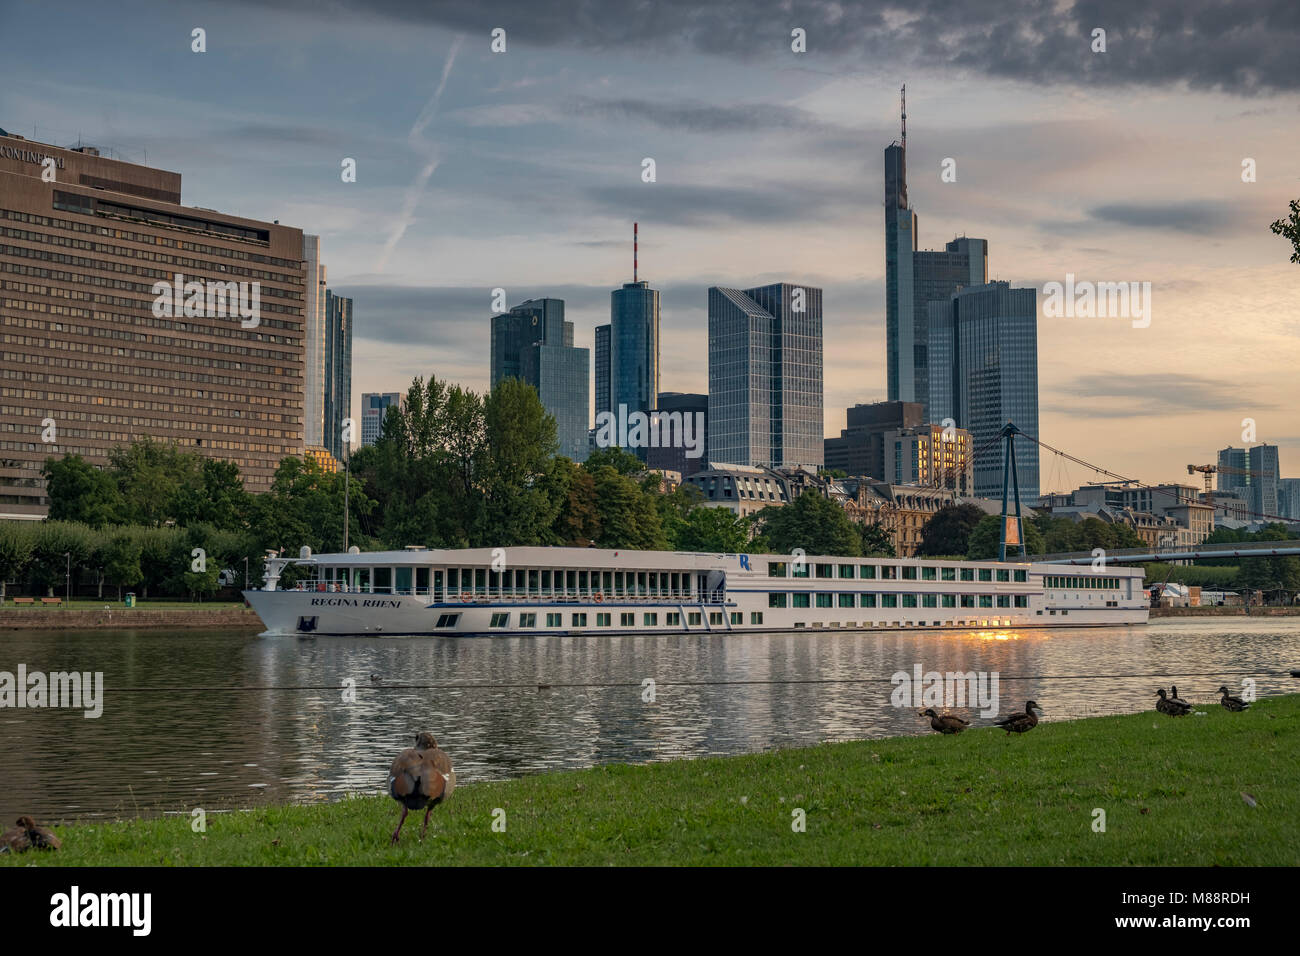 Ducks on the banks of the River Main with the skyline of Frankfurt Financial district behind Stock Photo